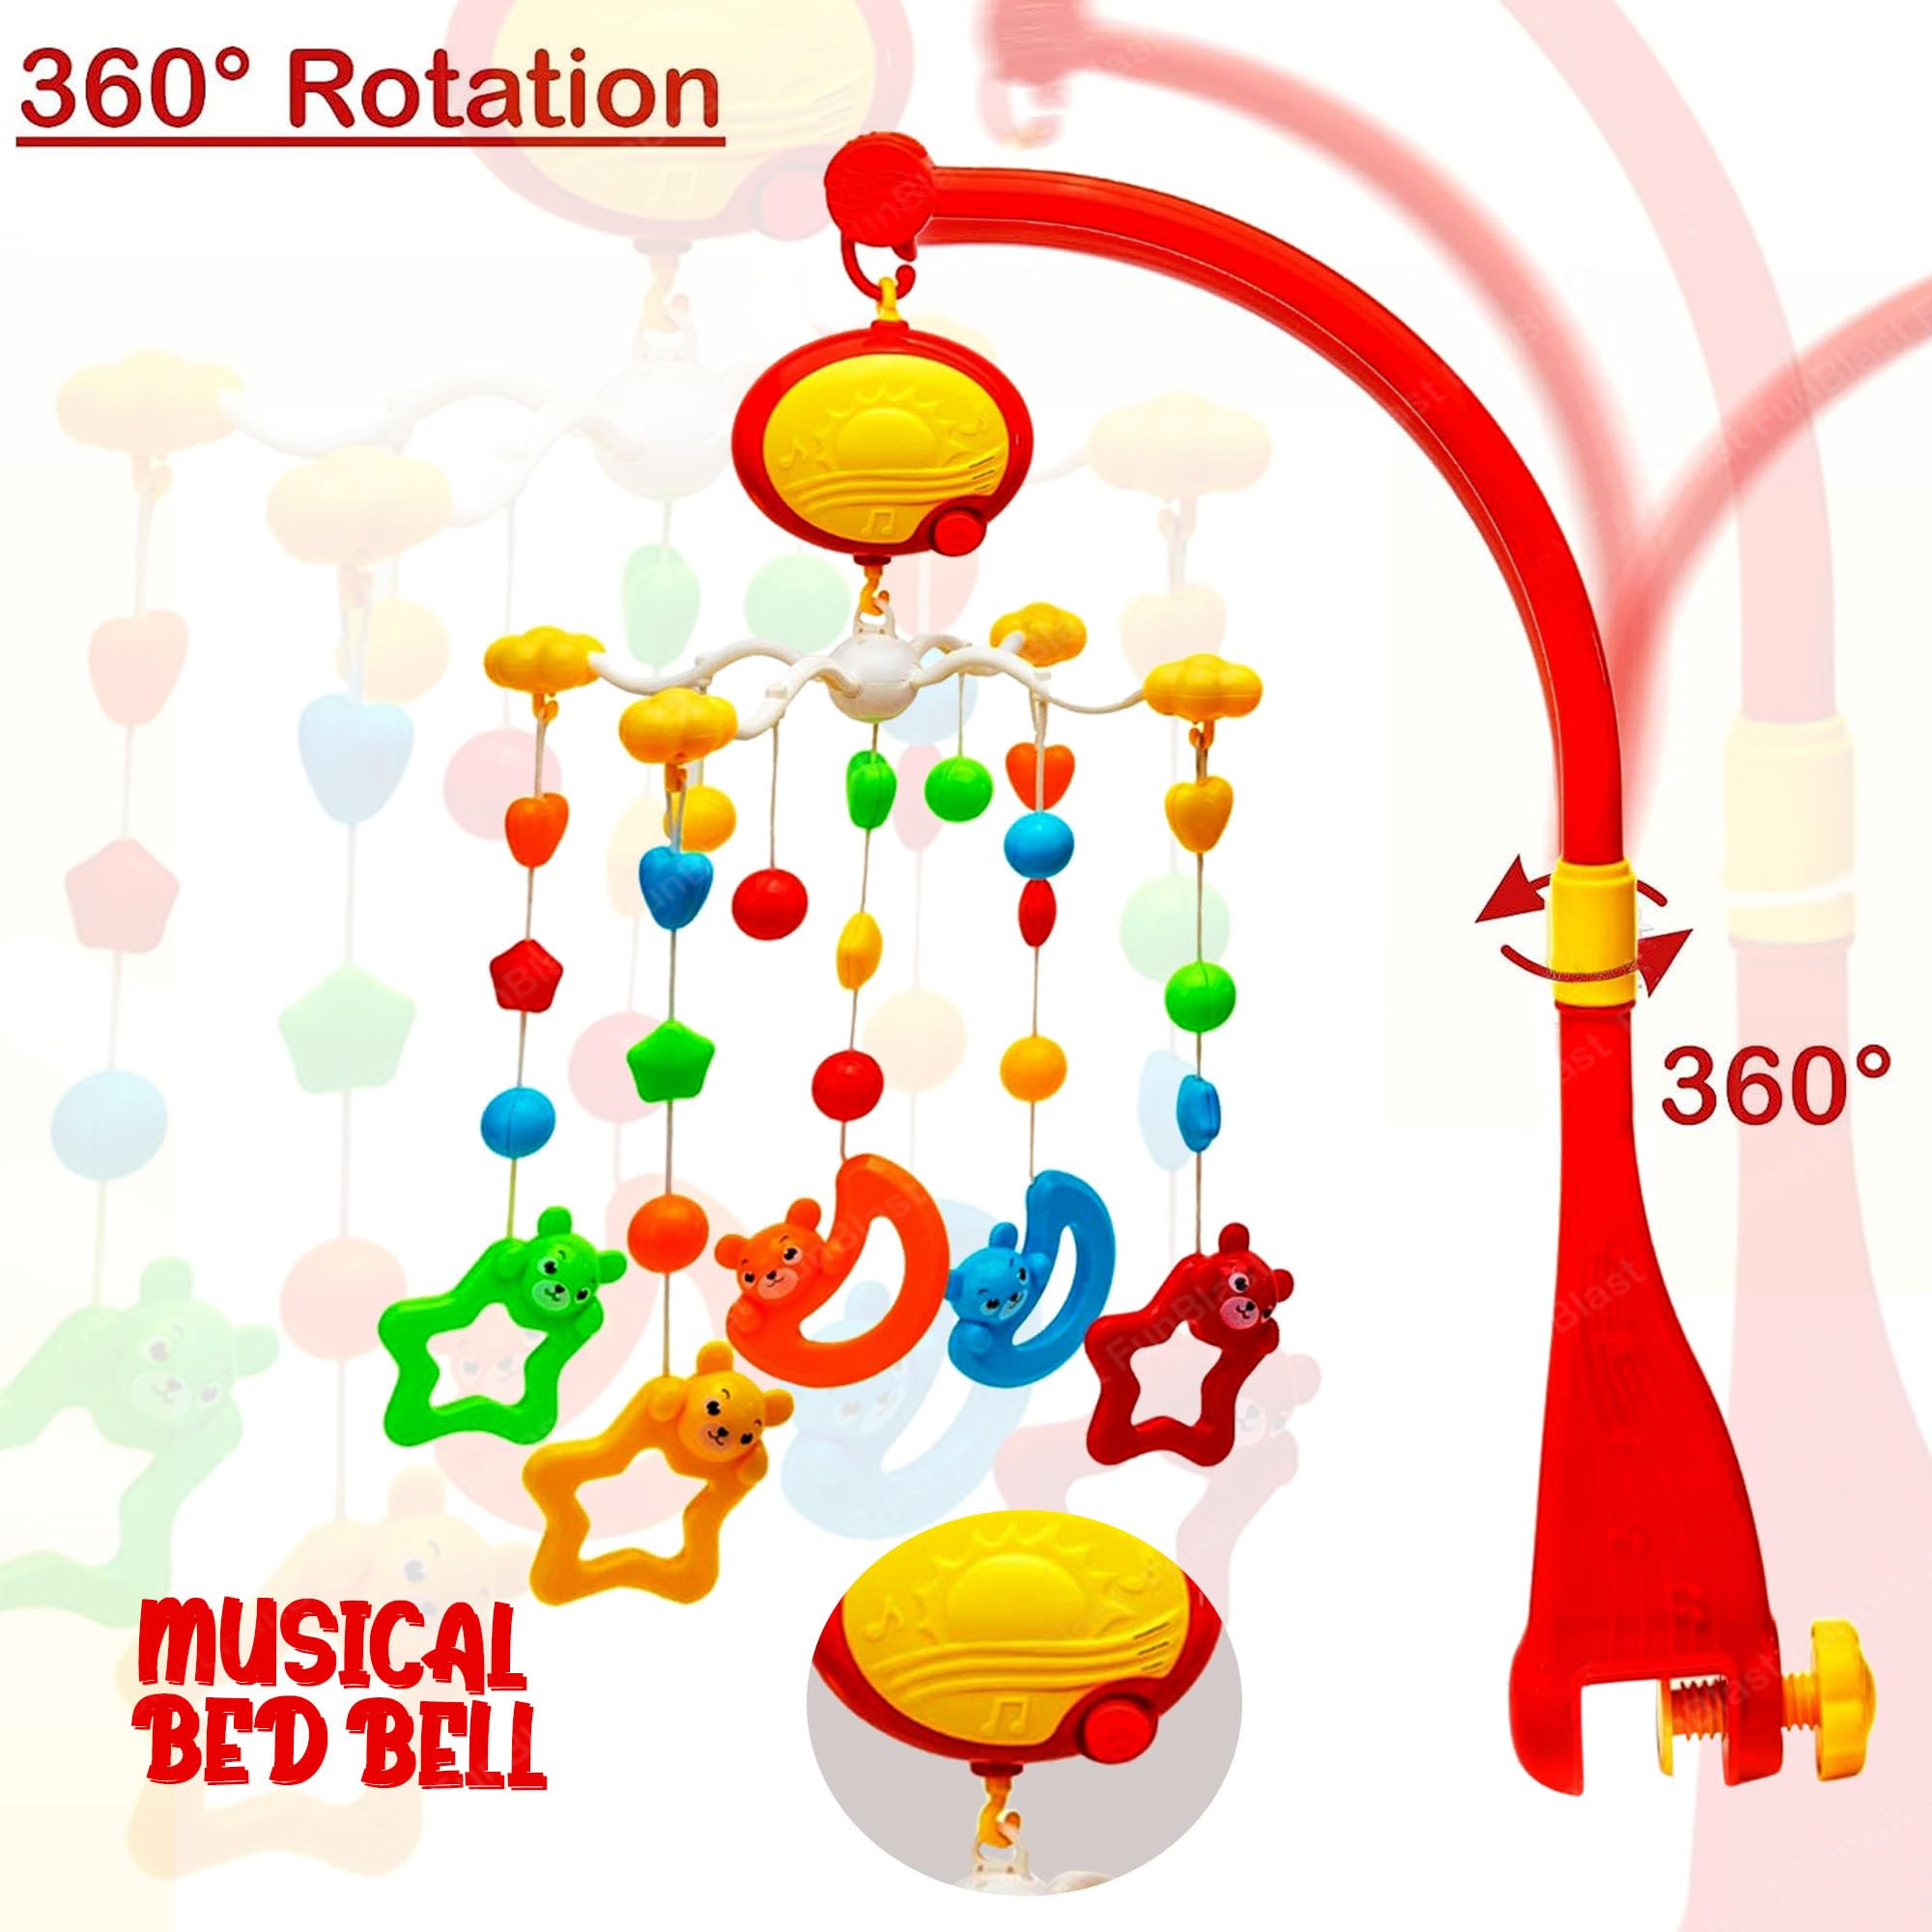 FunBlast Musical Bed Bell Cot Hanging Rotational Rattle Toy for Baby – Battery Operated Rattle Toys for New Born Babies and Toddlers, Baby Hanging Crib Cot Mobile for Infants 0-3 Months (Multicolor)